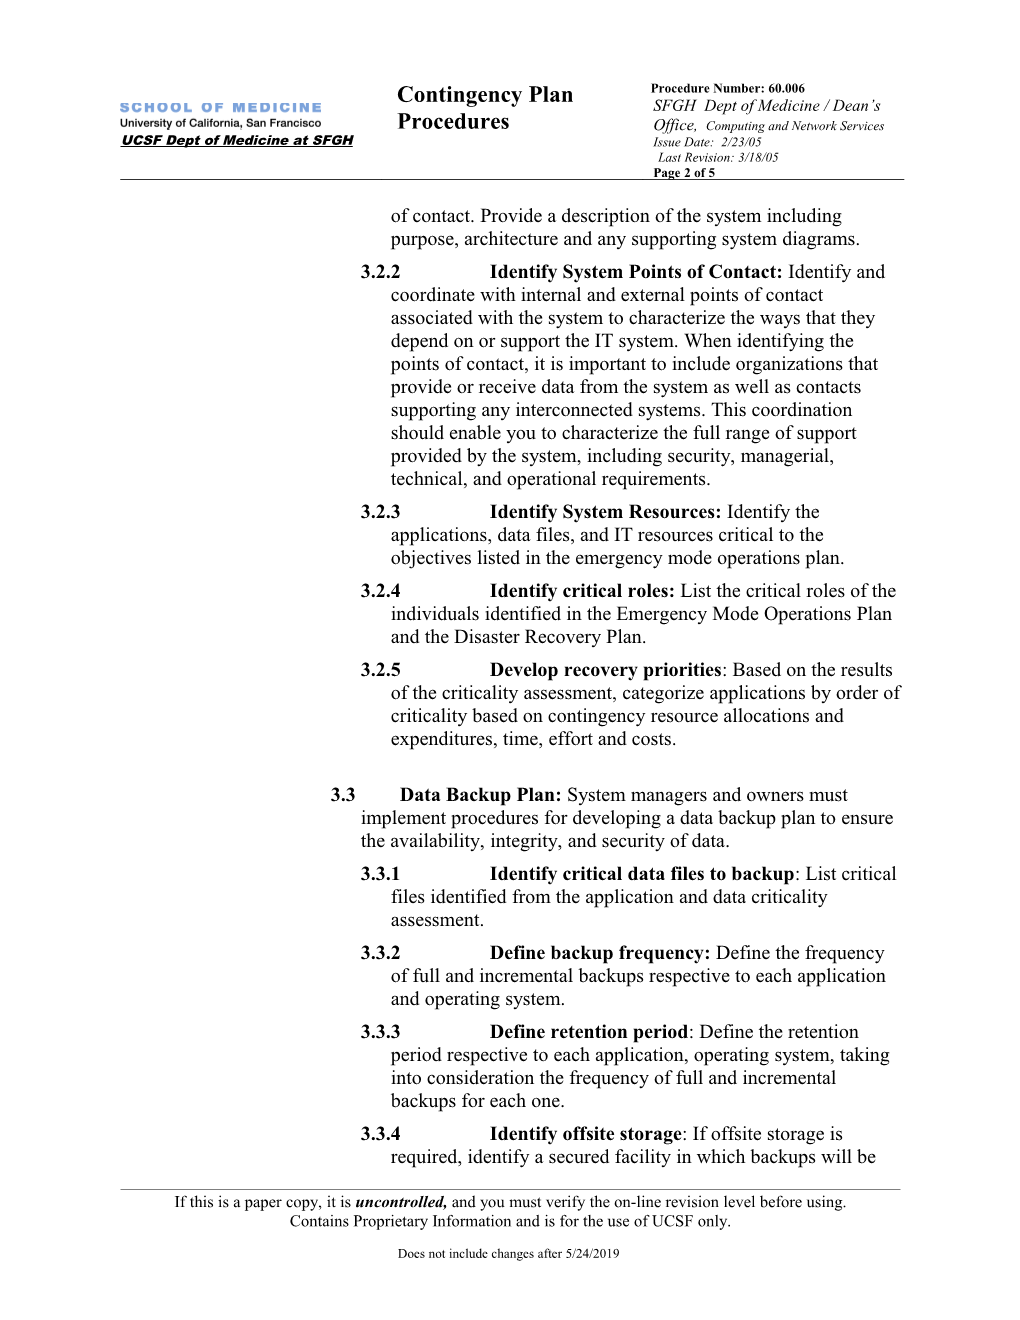 Application and Data Criticality Assessment (Section 3.2)